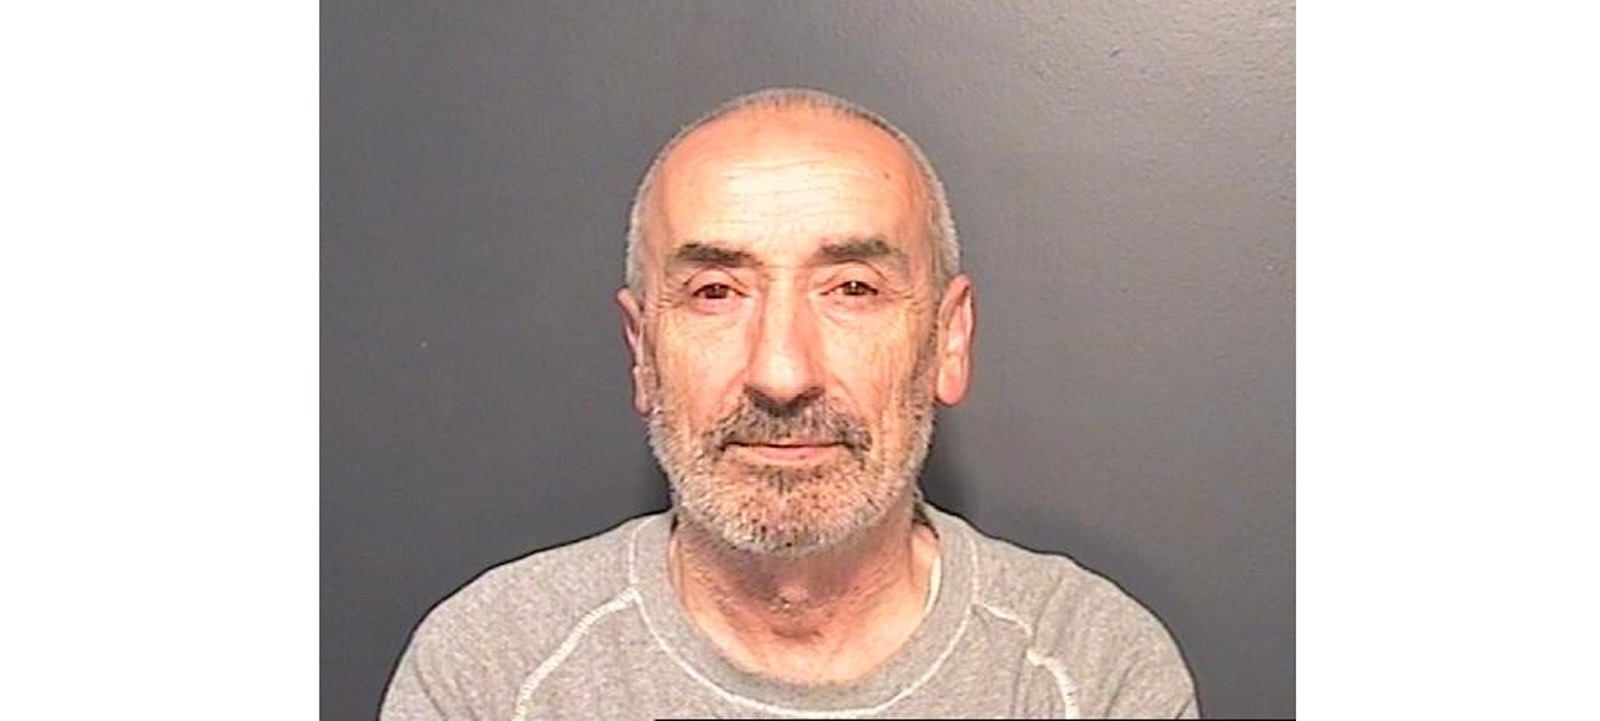 Malcolm Peter Barwick of Woodfield Drive, Harrogate, pleaded guilty on 16 January 2017 – the first day of his trial – to two counts of sexual activity with a teenage girl under 16